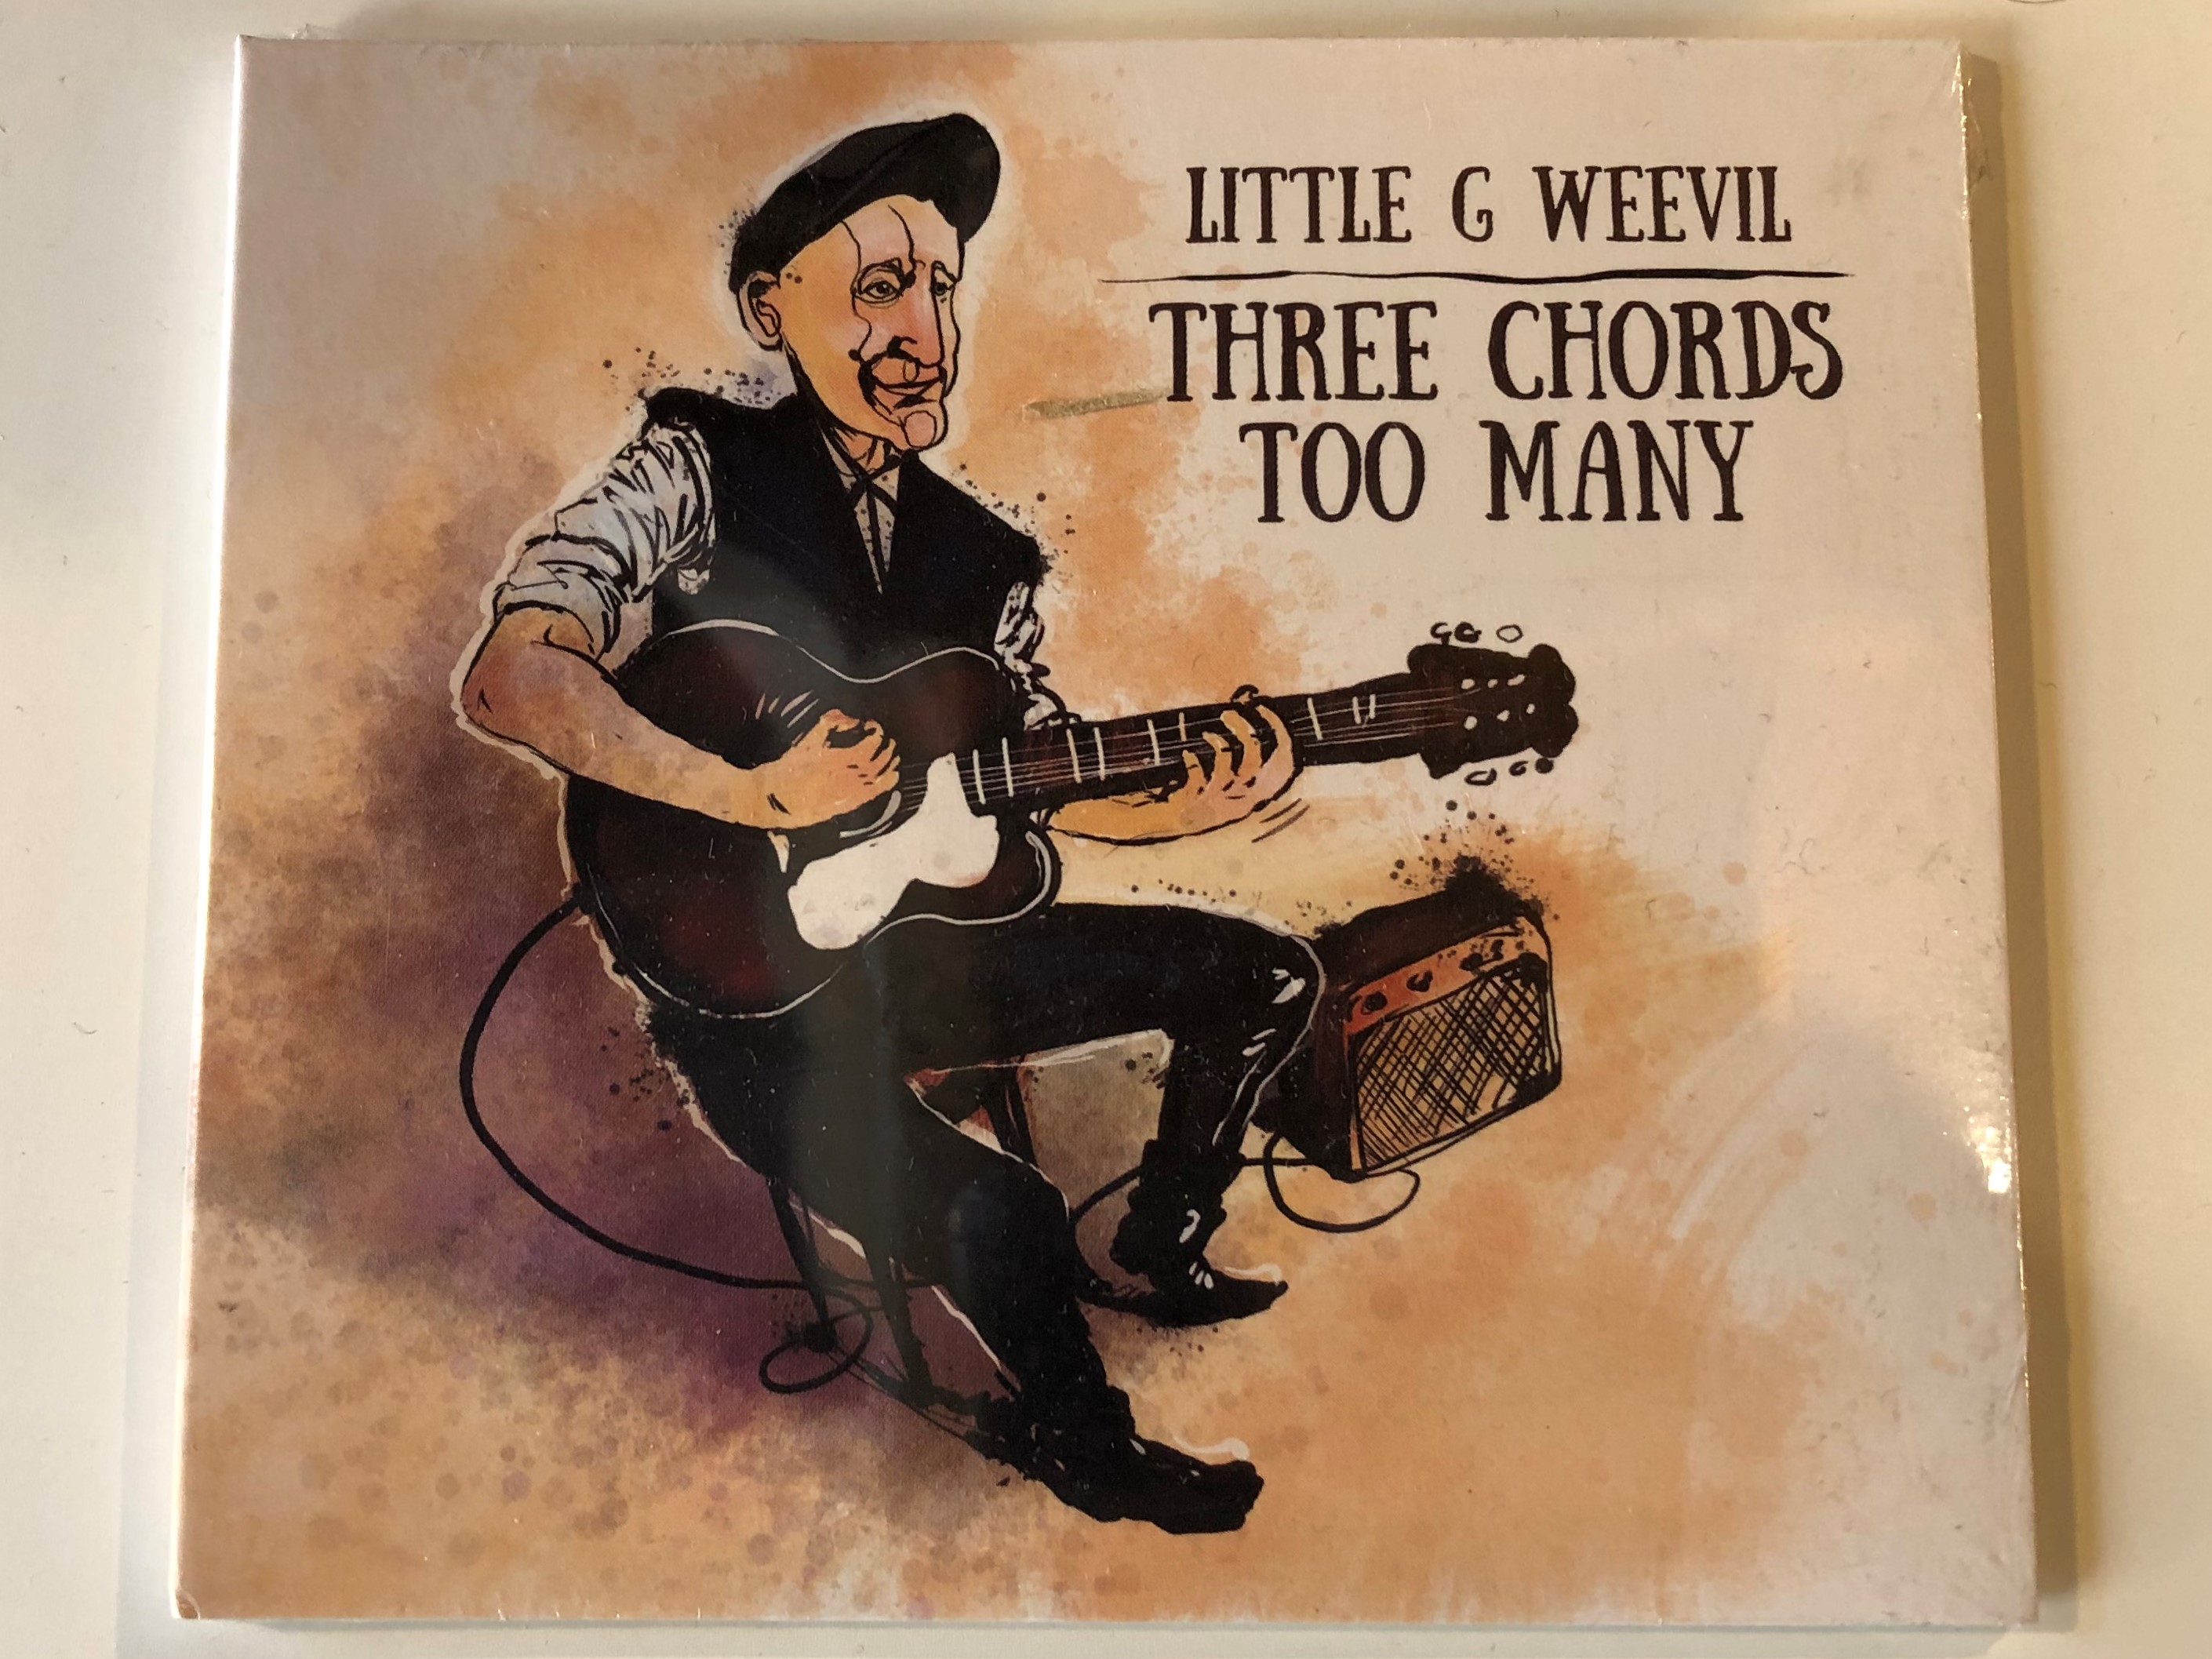 little-g-weevil-three-chords-too-many-xlnt-records-audio-cd-1602-1-.jpg